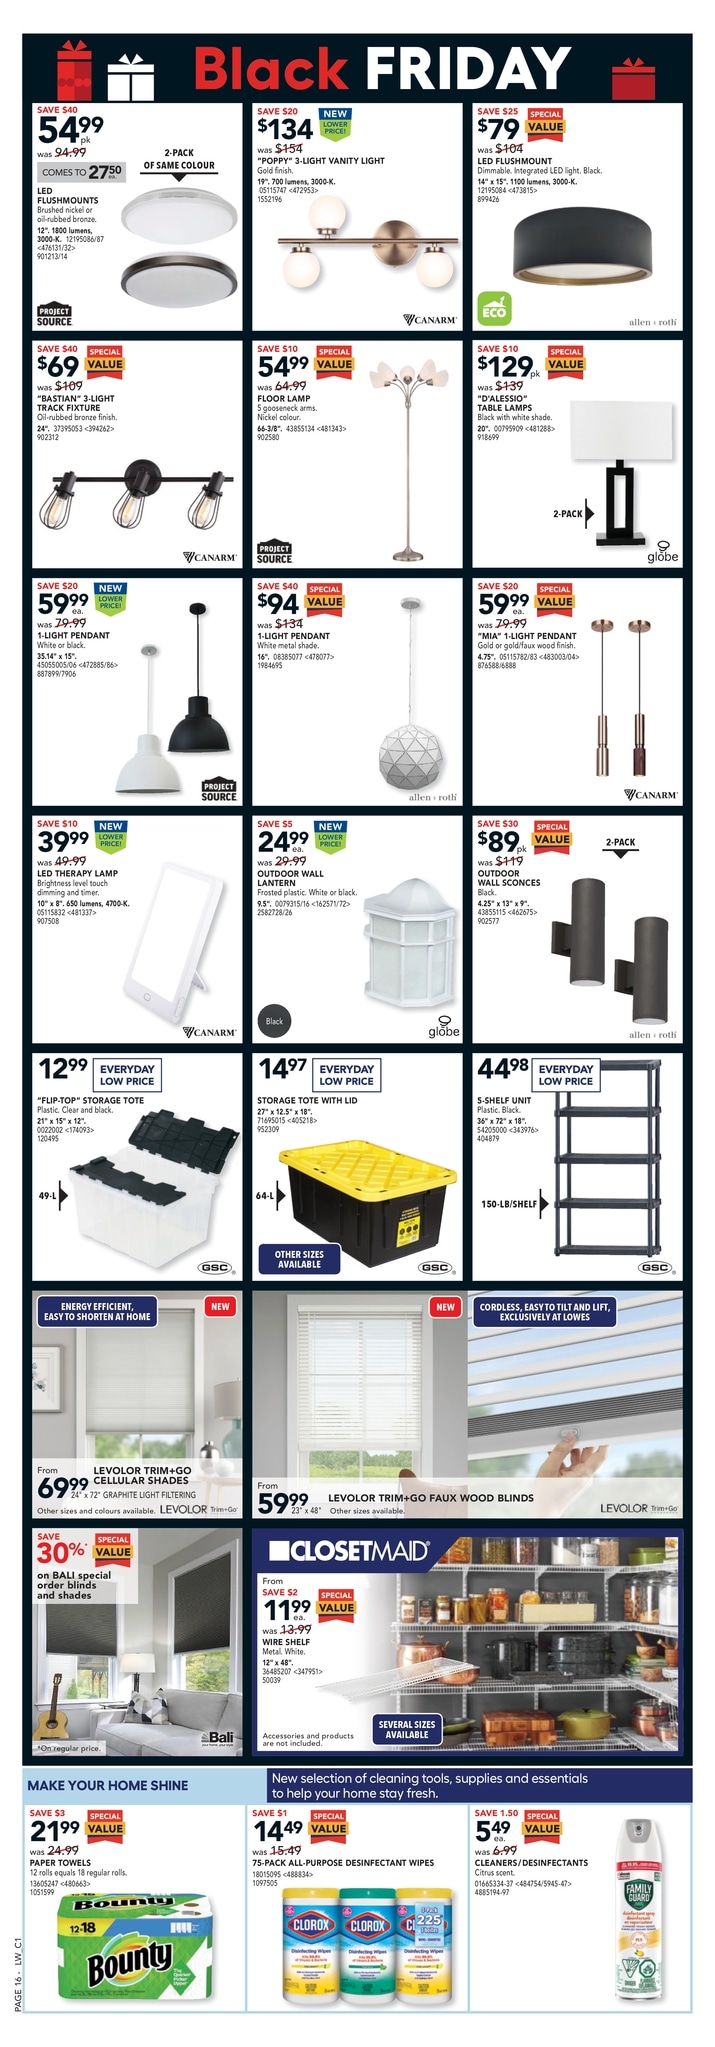 LOWE'S - Weekly Flyer Specials - Black Friday - Page 19